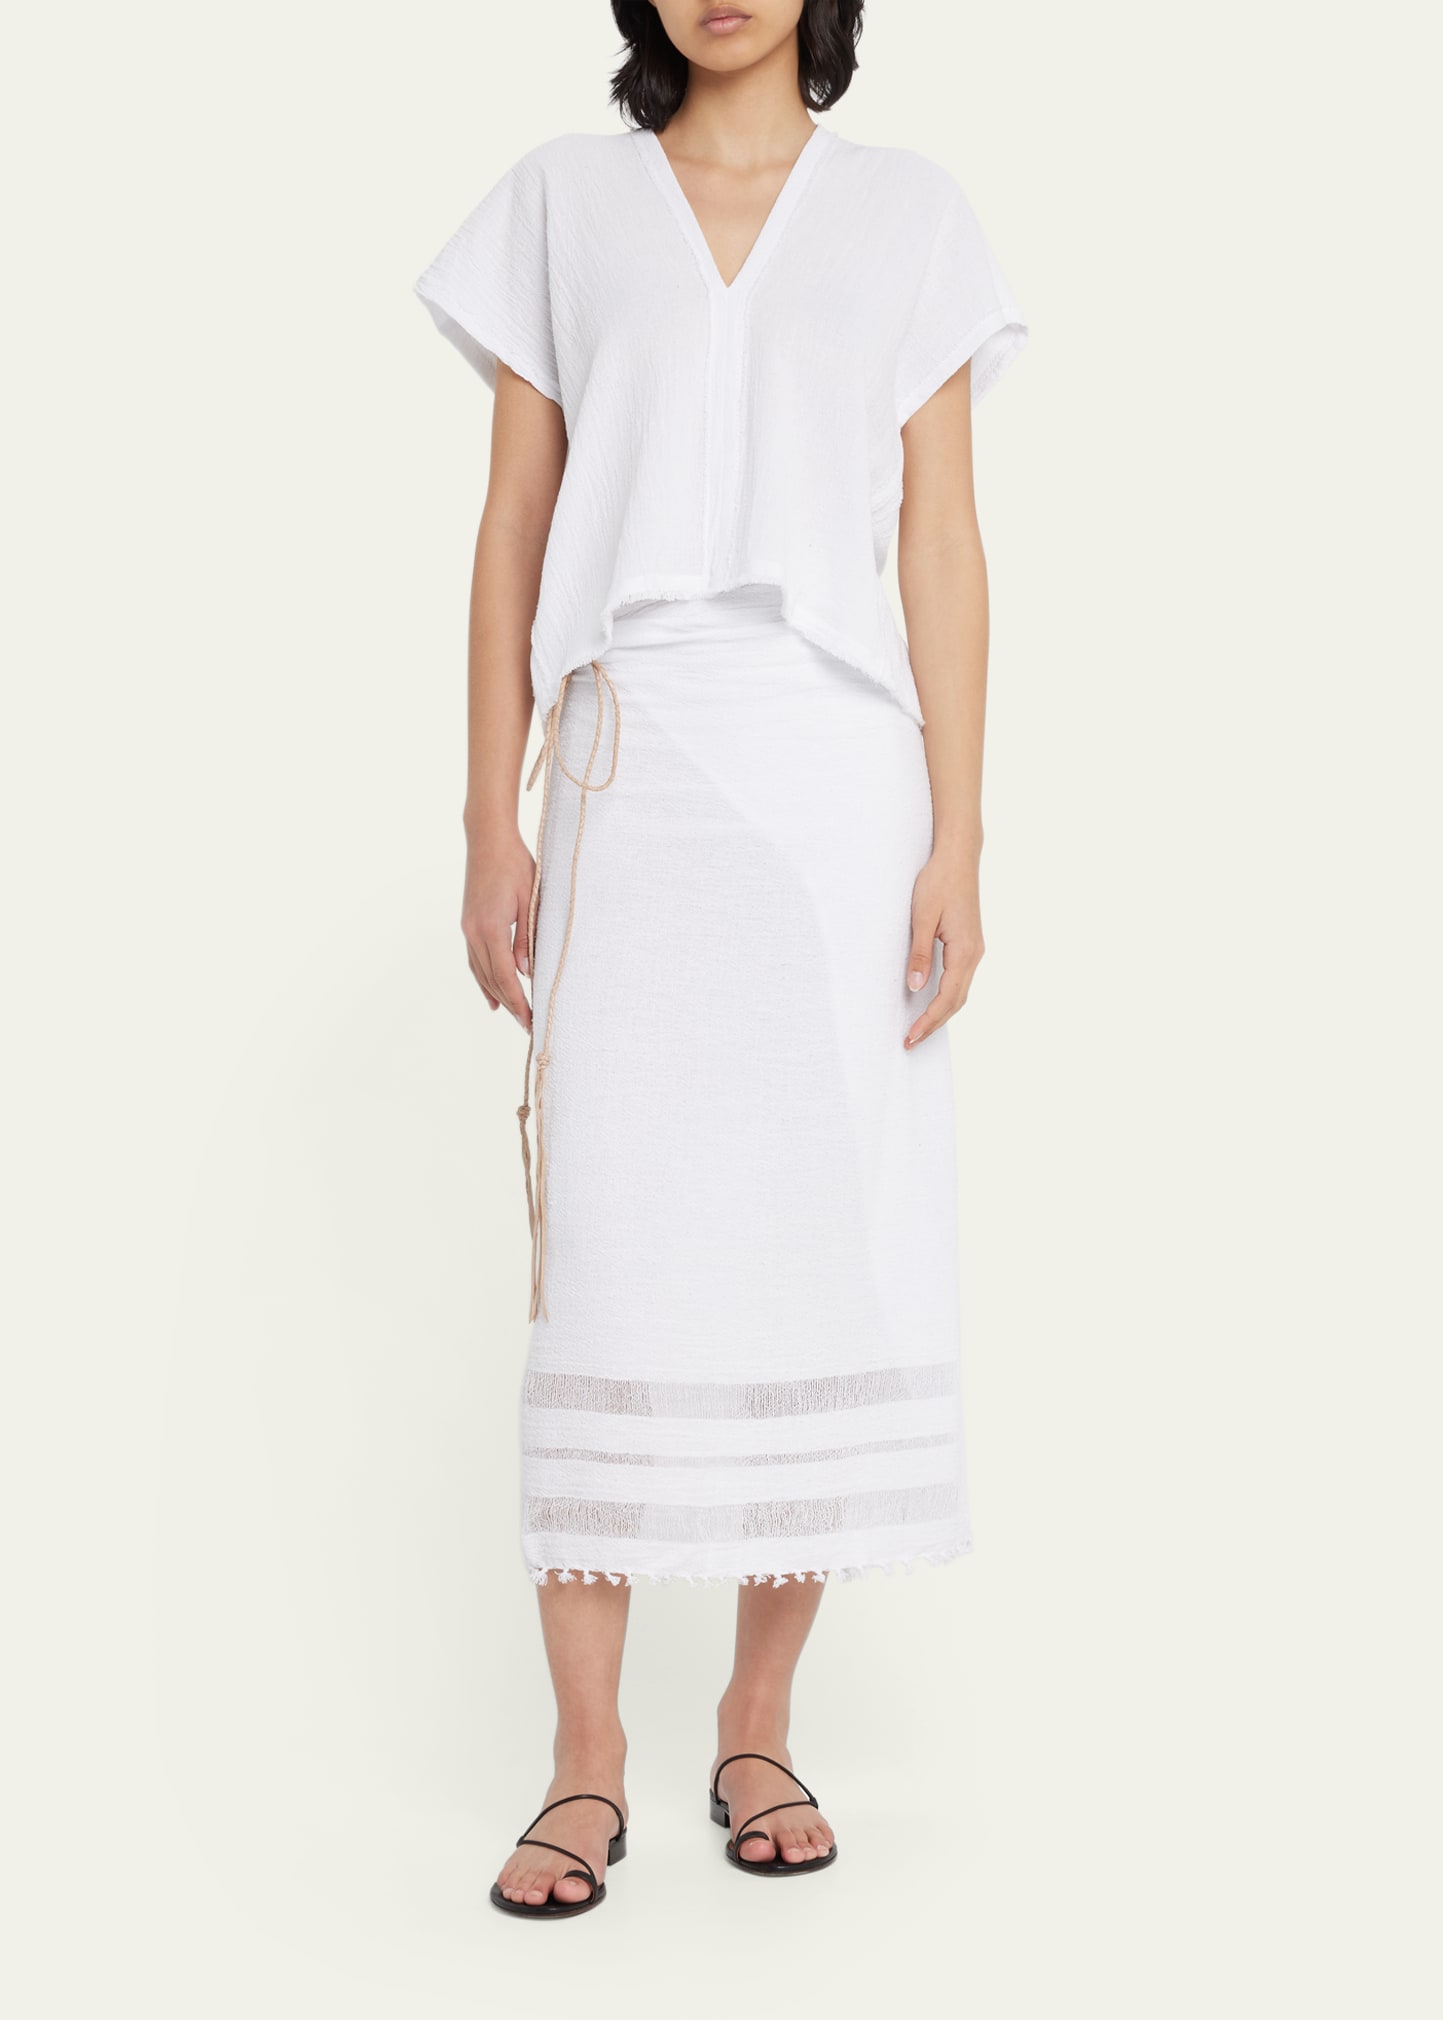 Caravana Pareo Leather Long Coverup In White